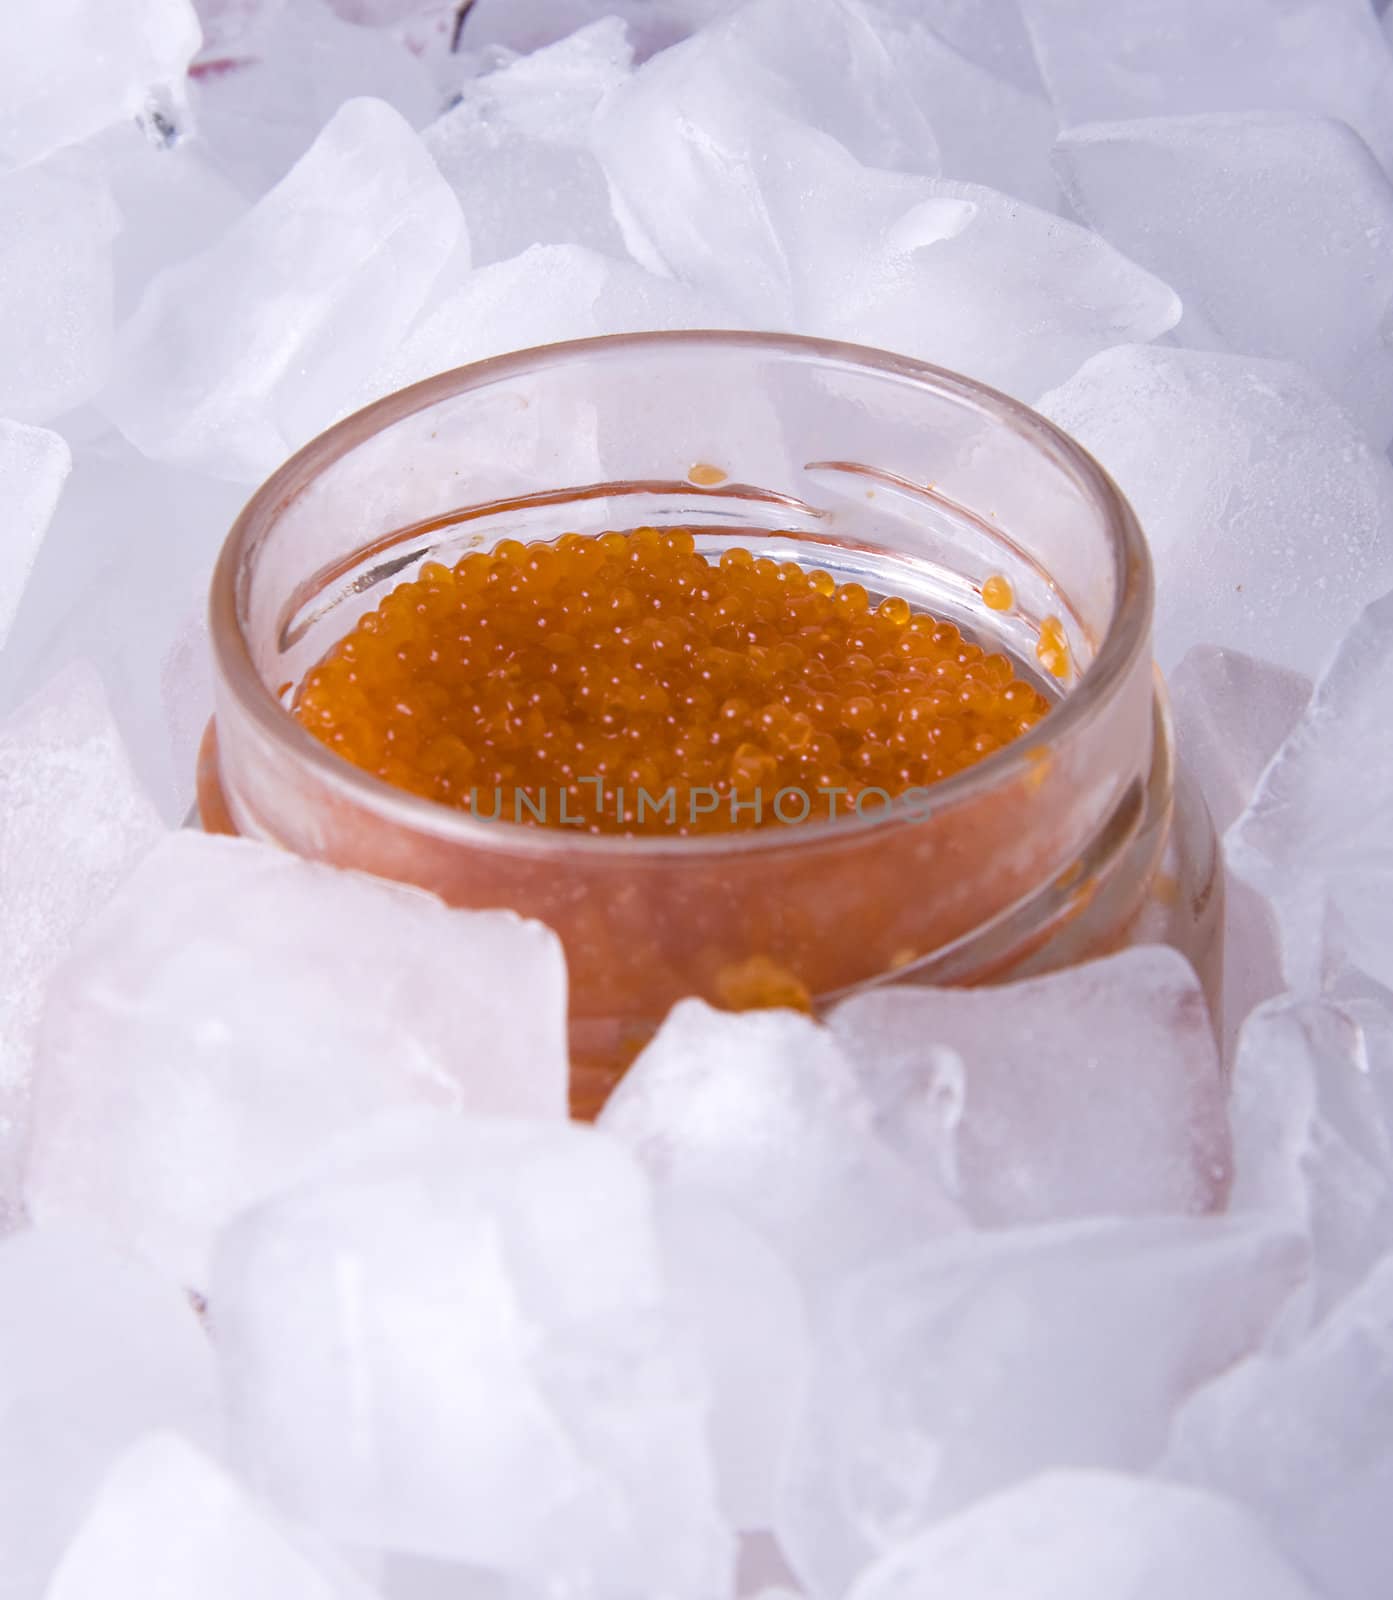 Red caviar in a glass jar surrounded by ice cubes